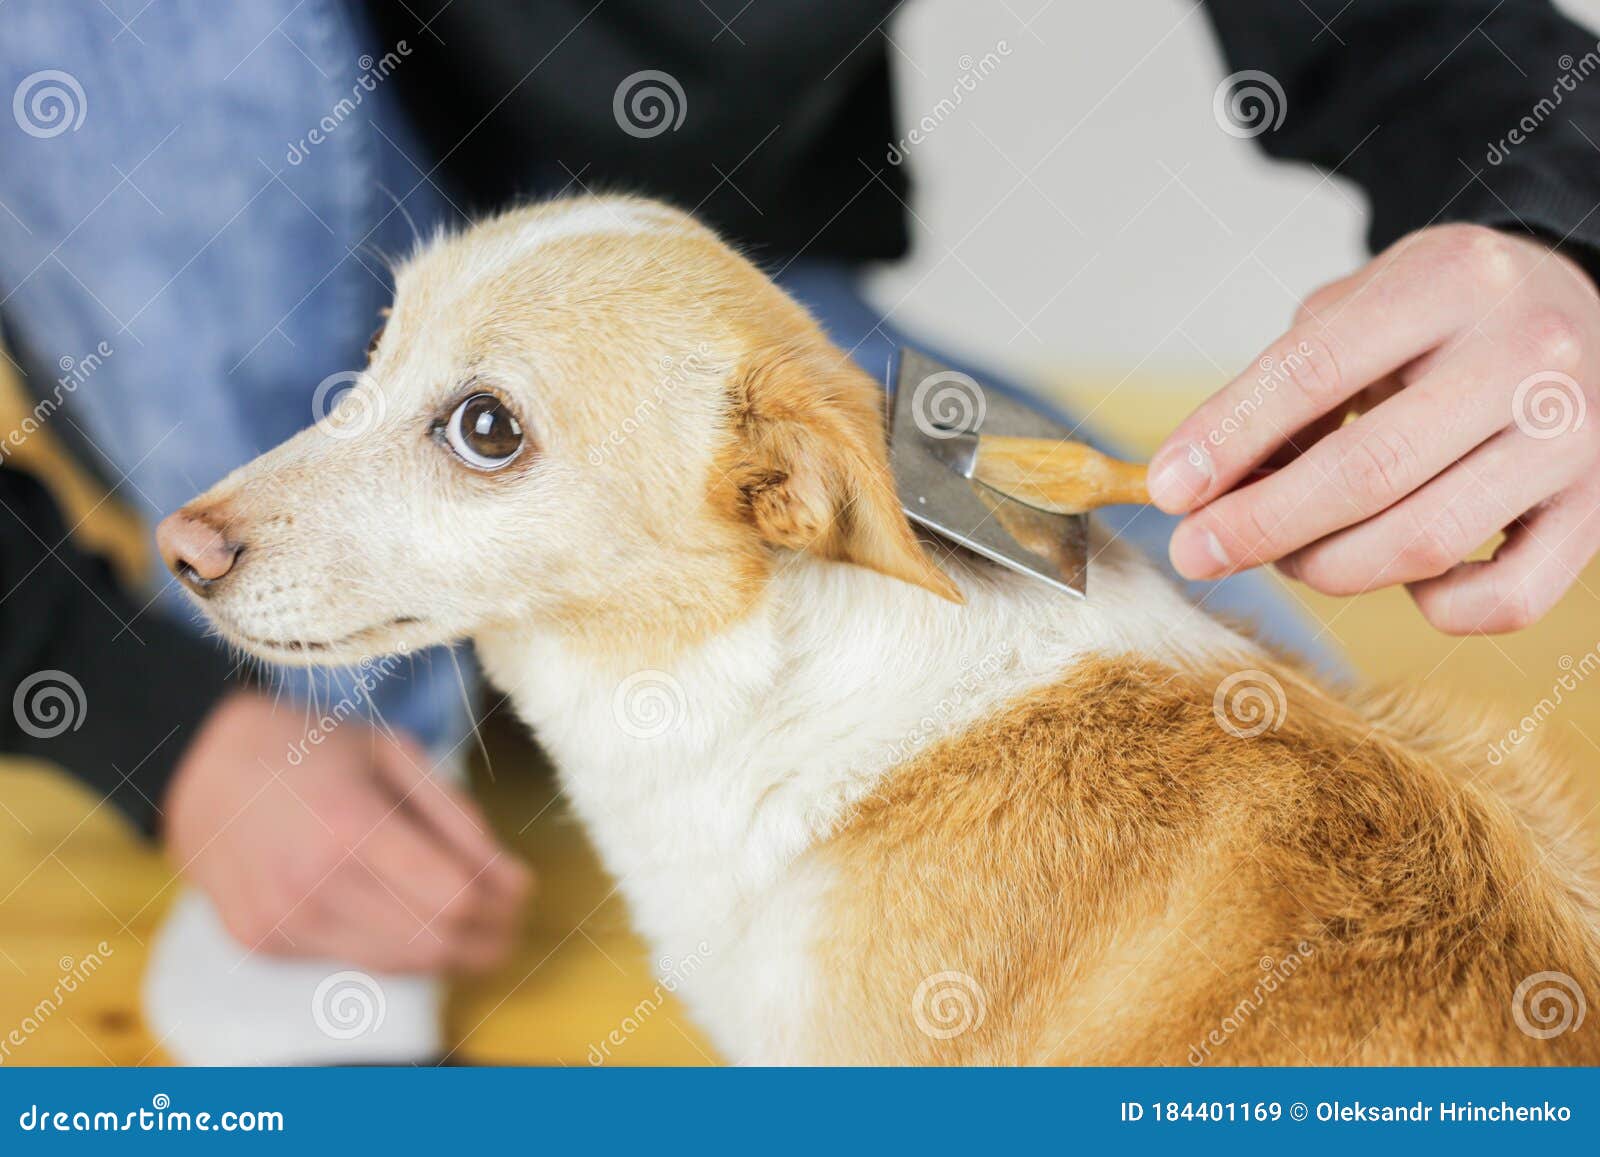 Combing a Dog’s Coat. Dog Hairstyle. Pet Care Stock Image - Image of ...